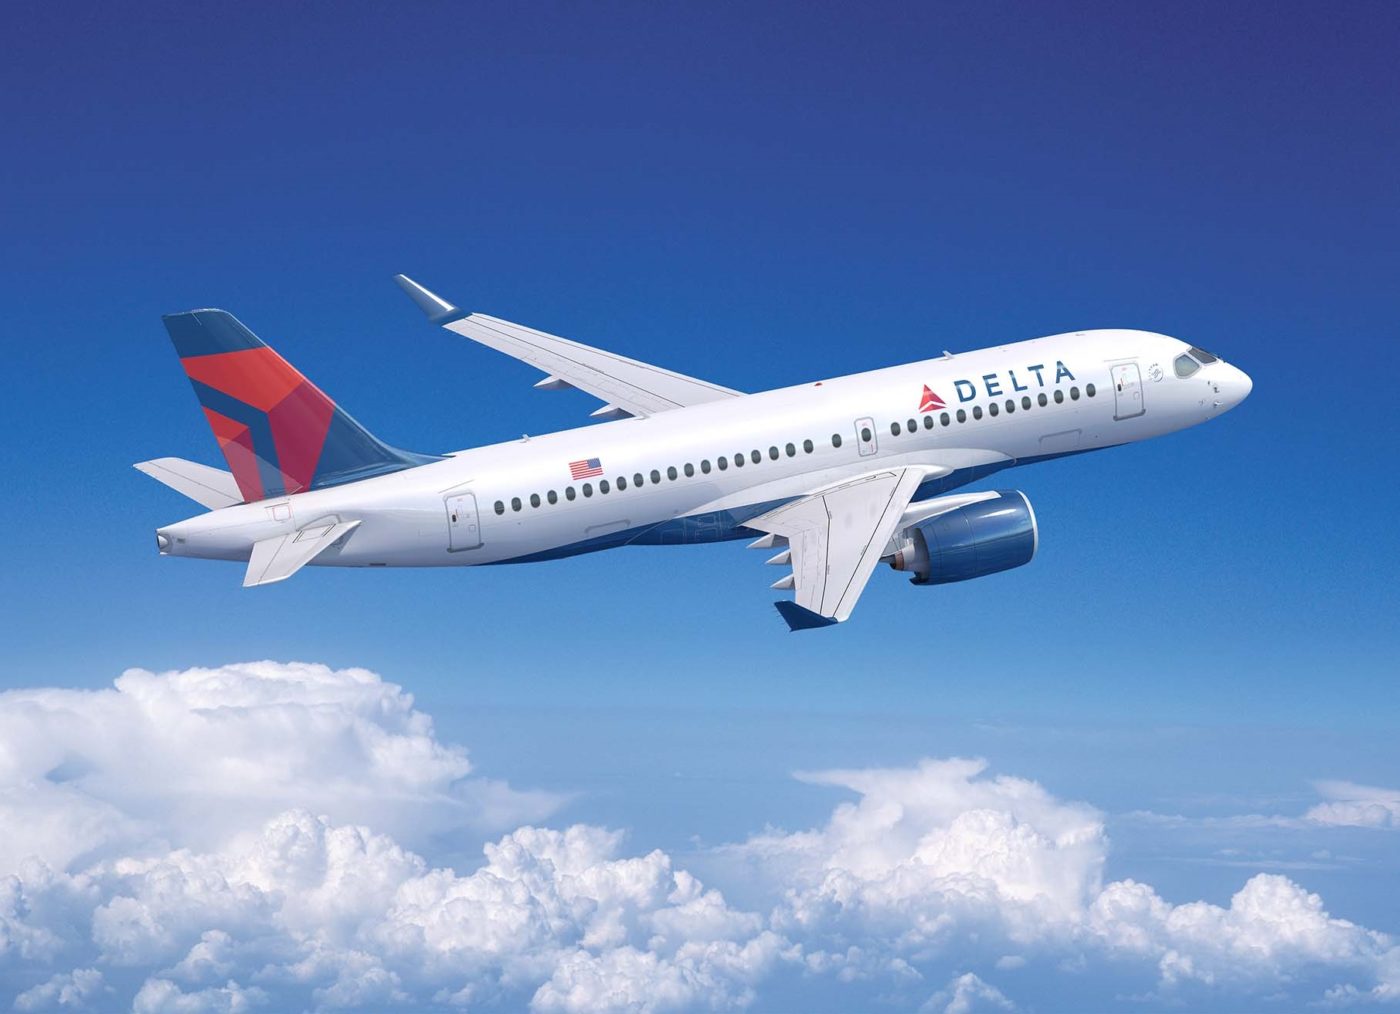 Delta Air Lines orders 5 additional Airbus A220 aircraft - Skies Mag